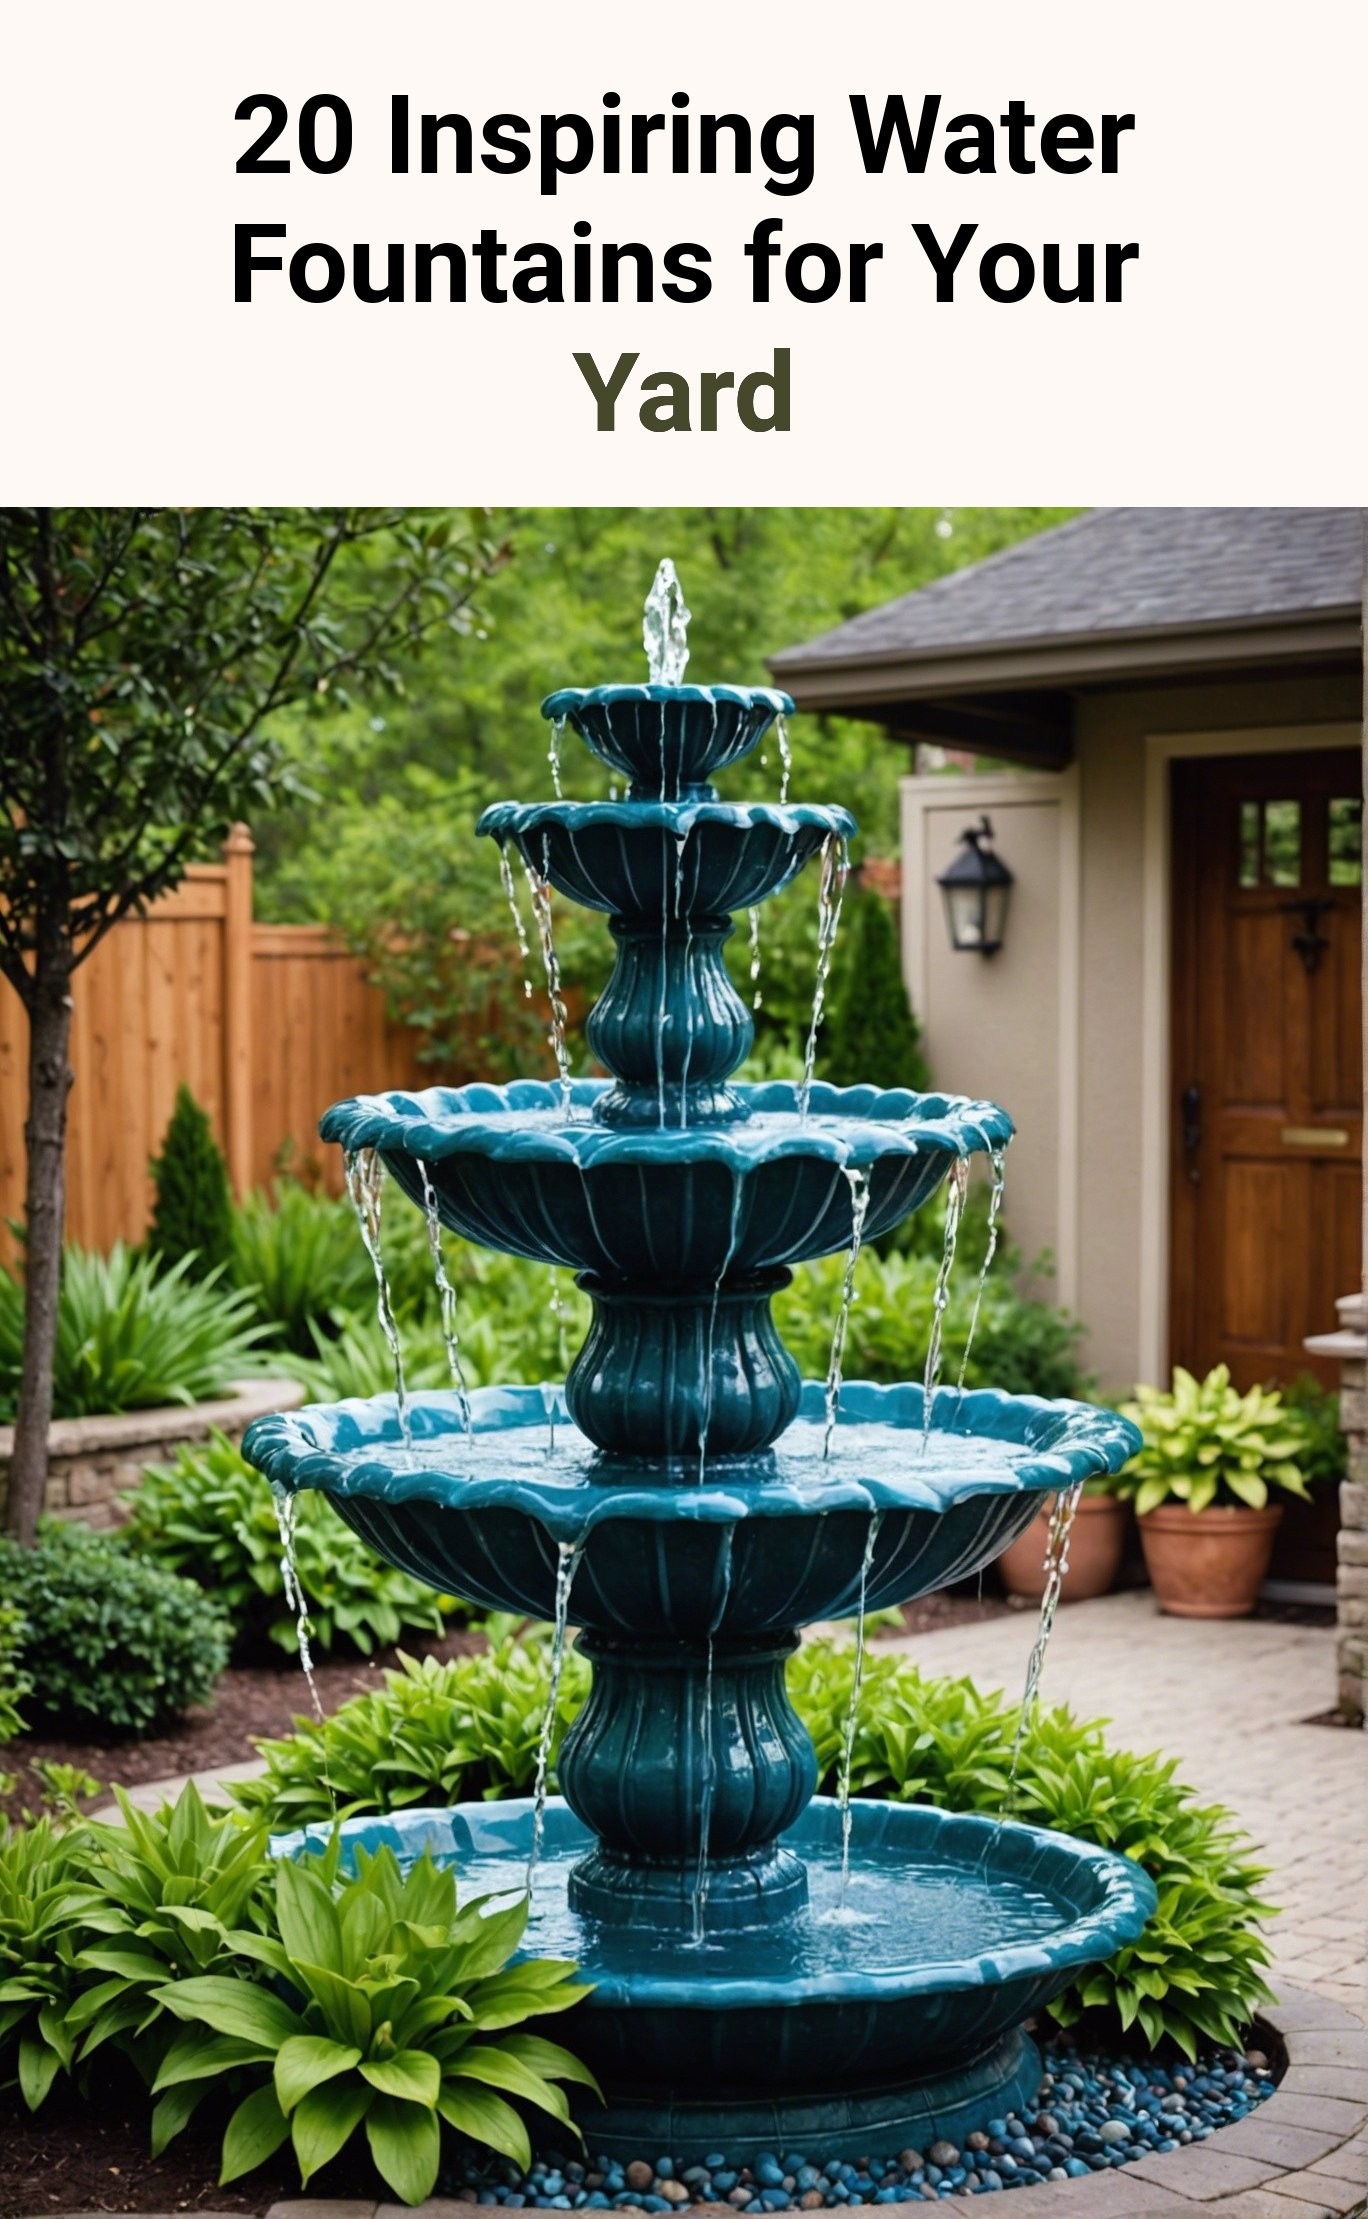 20 Inspiring Water Fountains for Your Yard